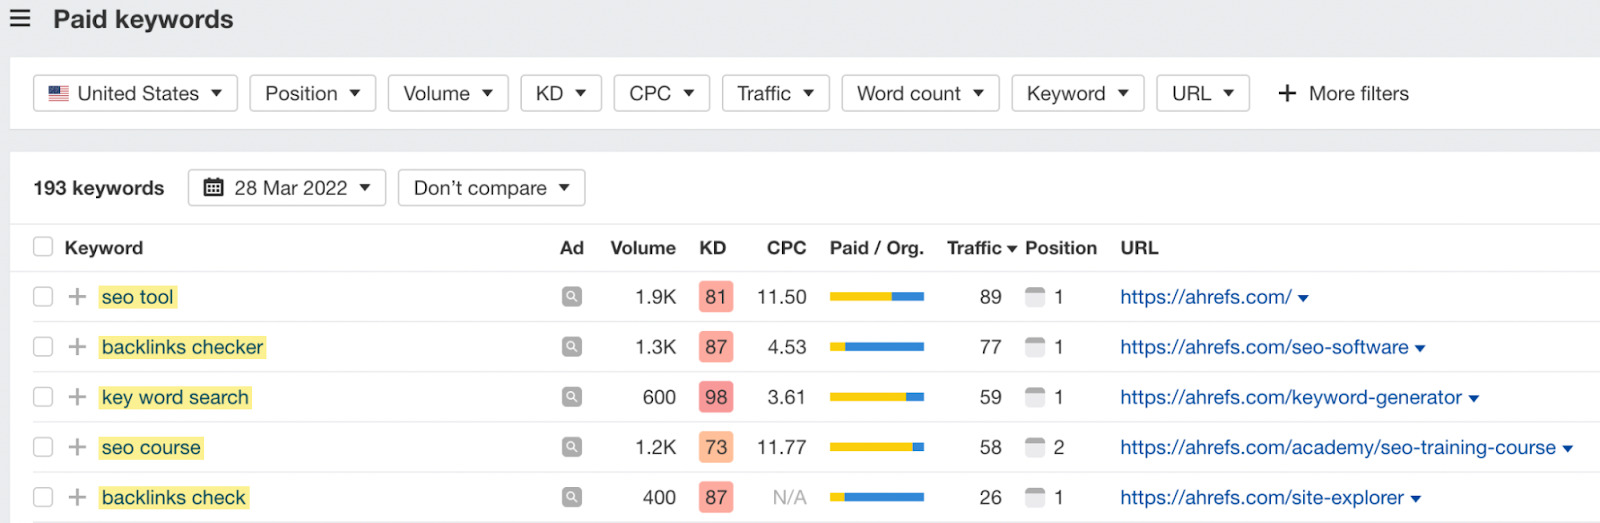 Paid keywords report results 1